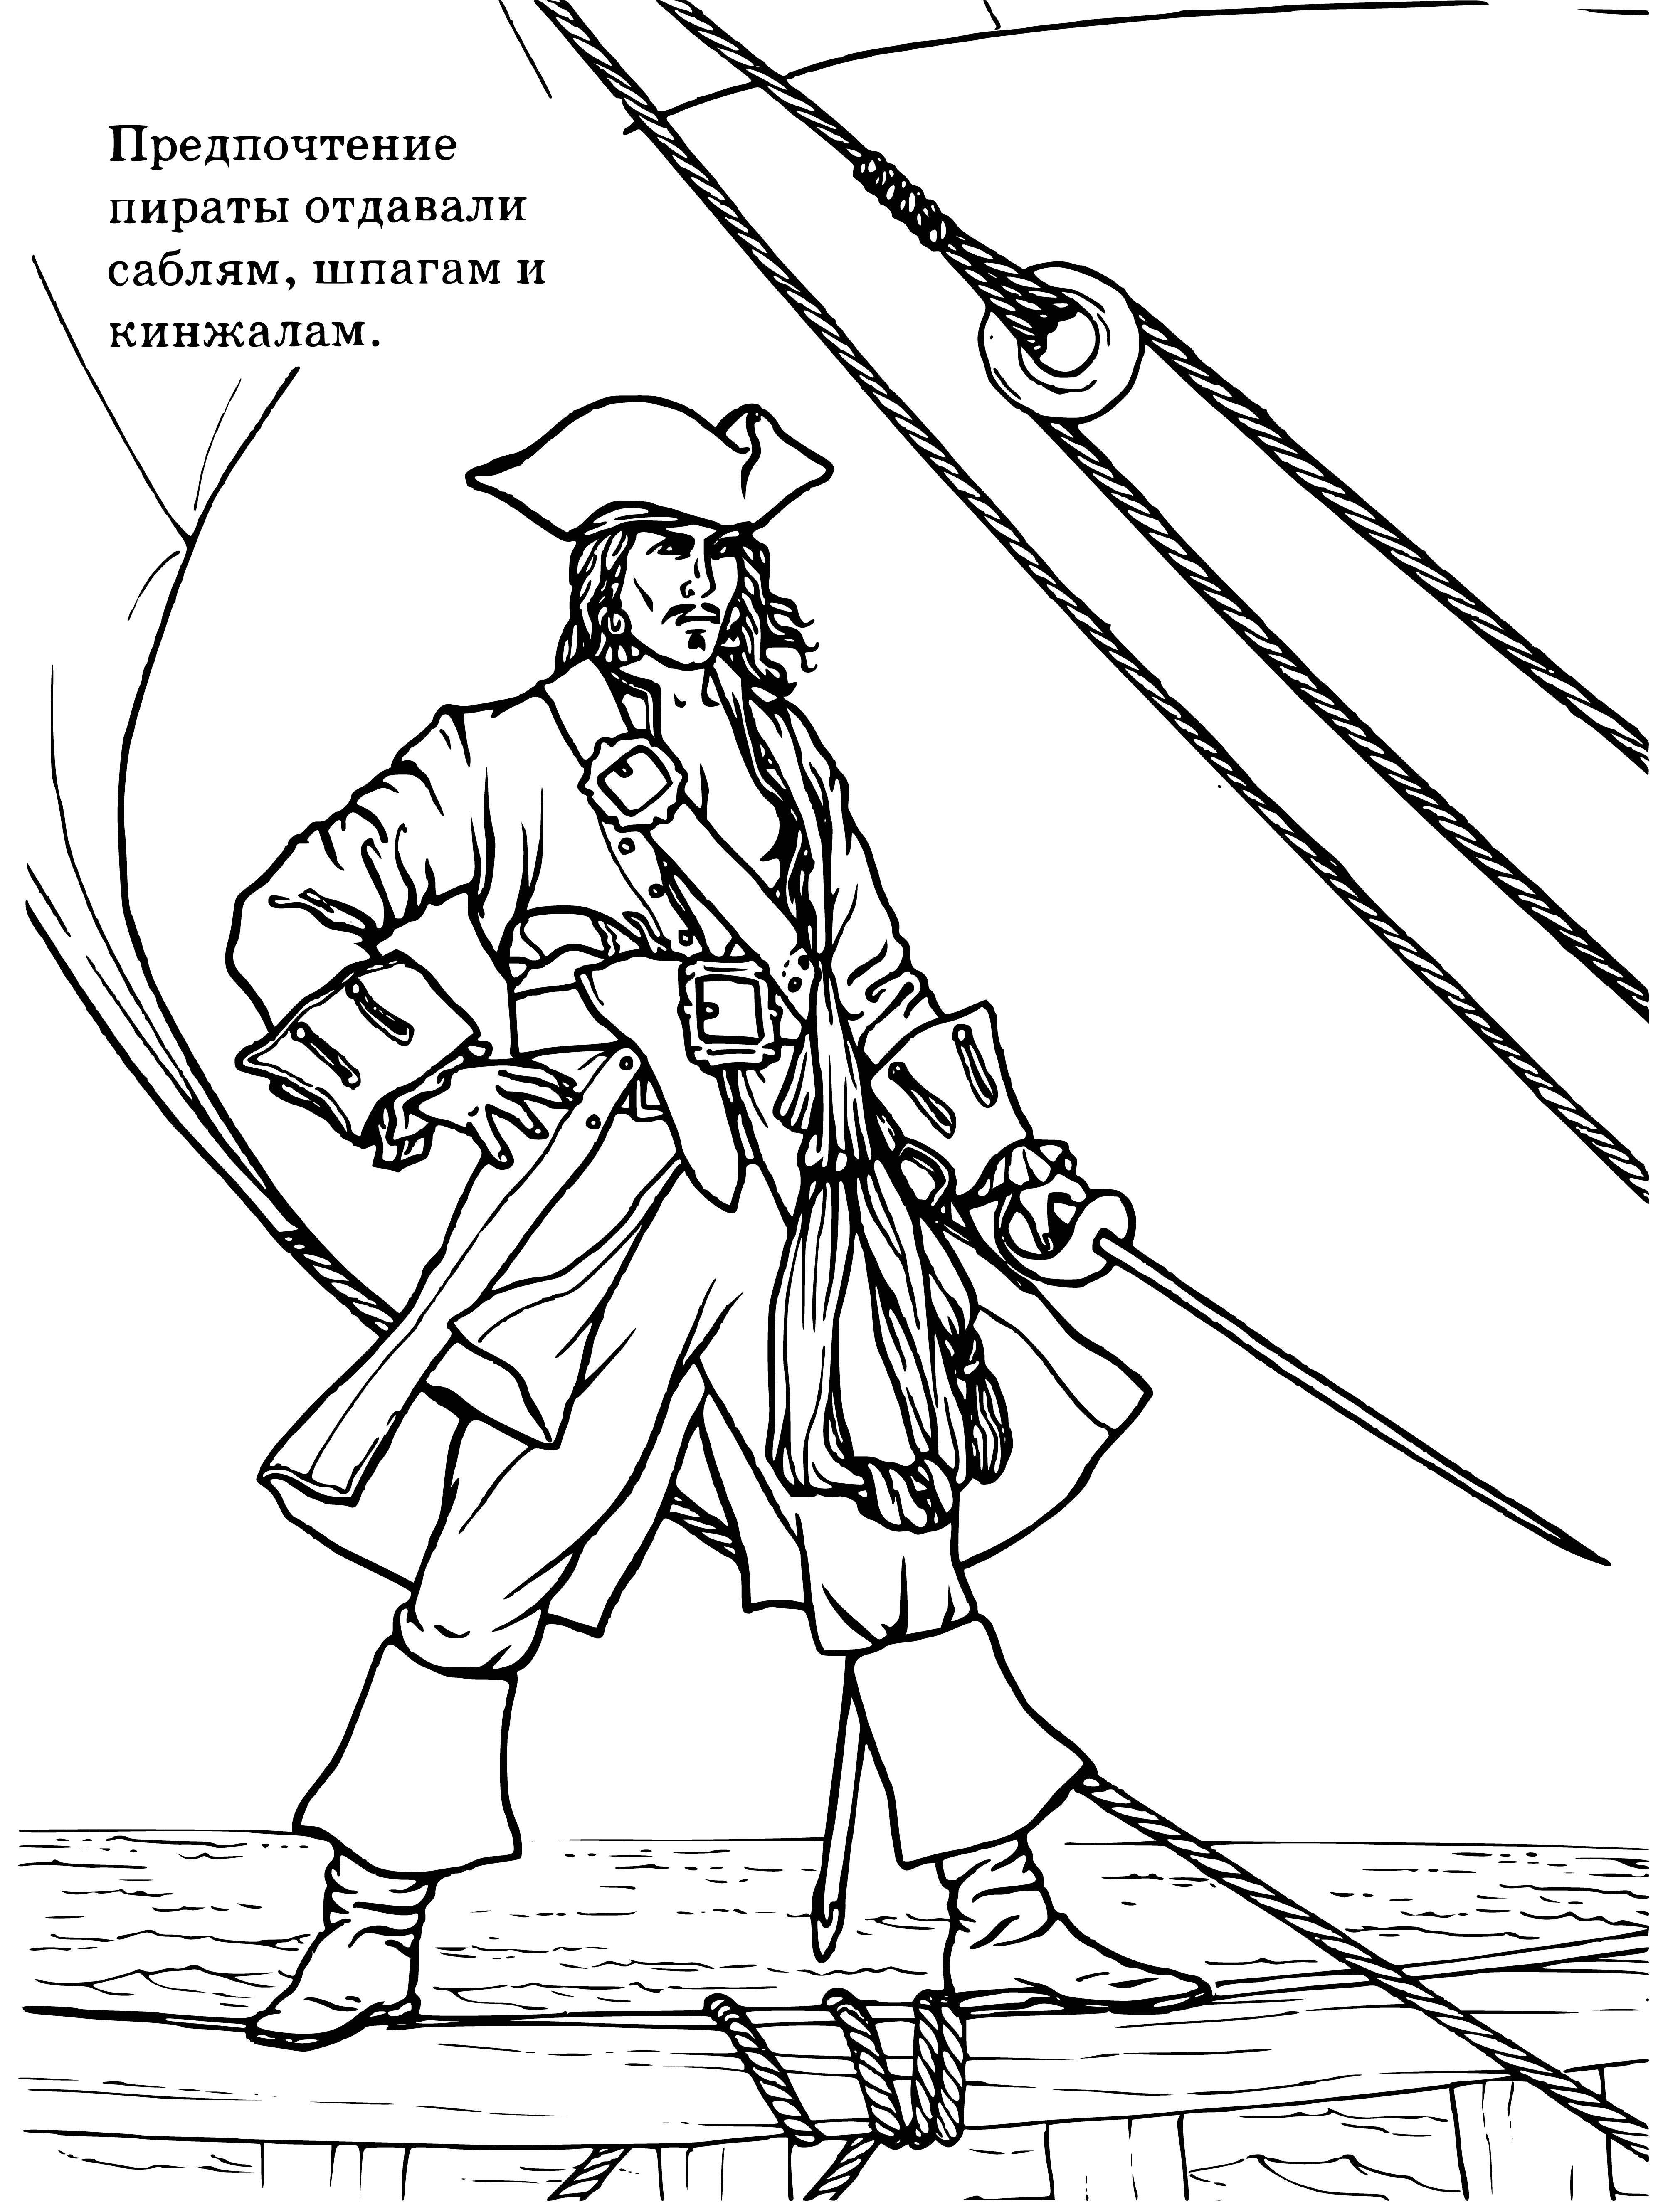 coloring page: Pirates gather on dock, four with different clothes/scars, 2 with gold teeth, and one with eye patch. All have swords/guns. Treasure chest at feet.